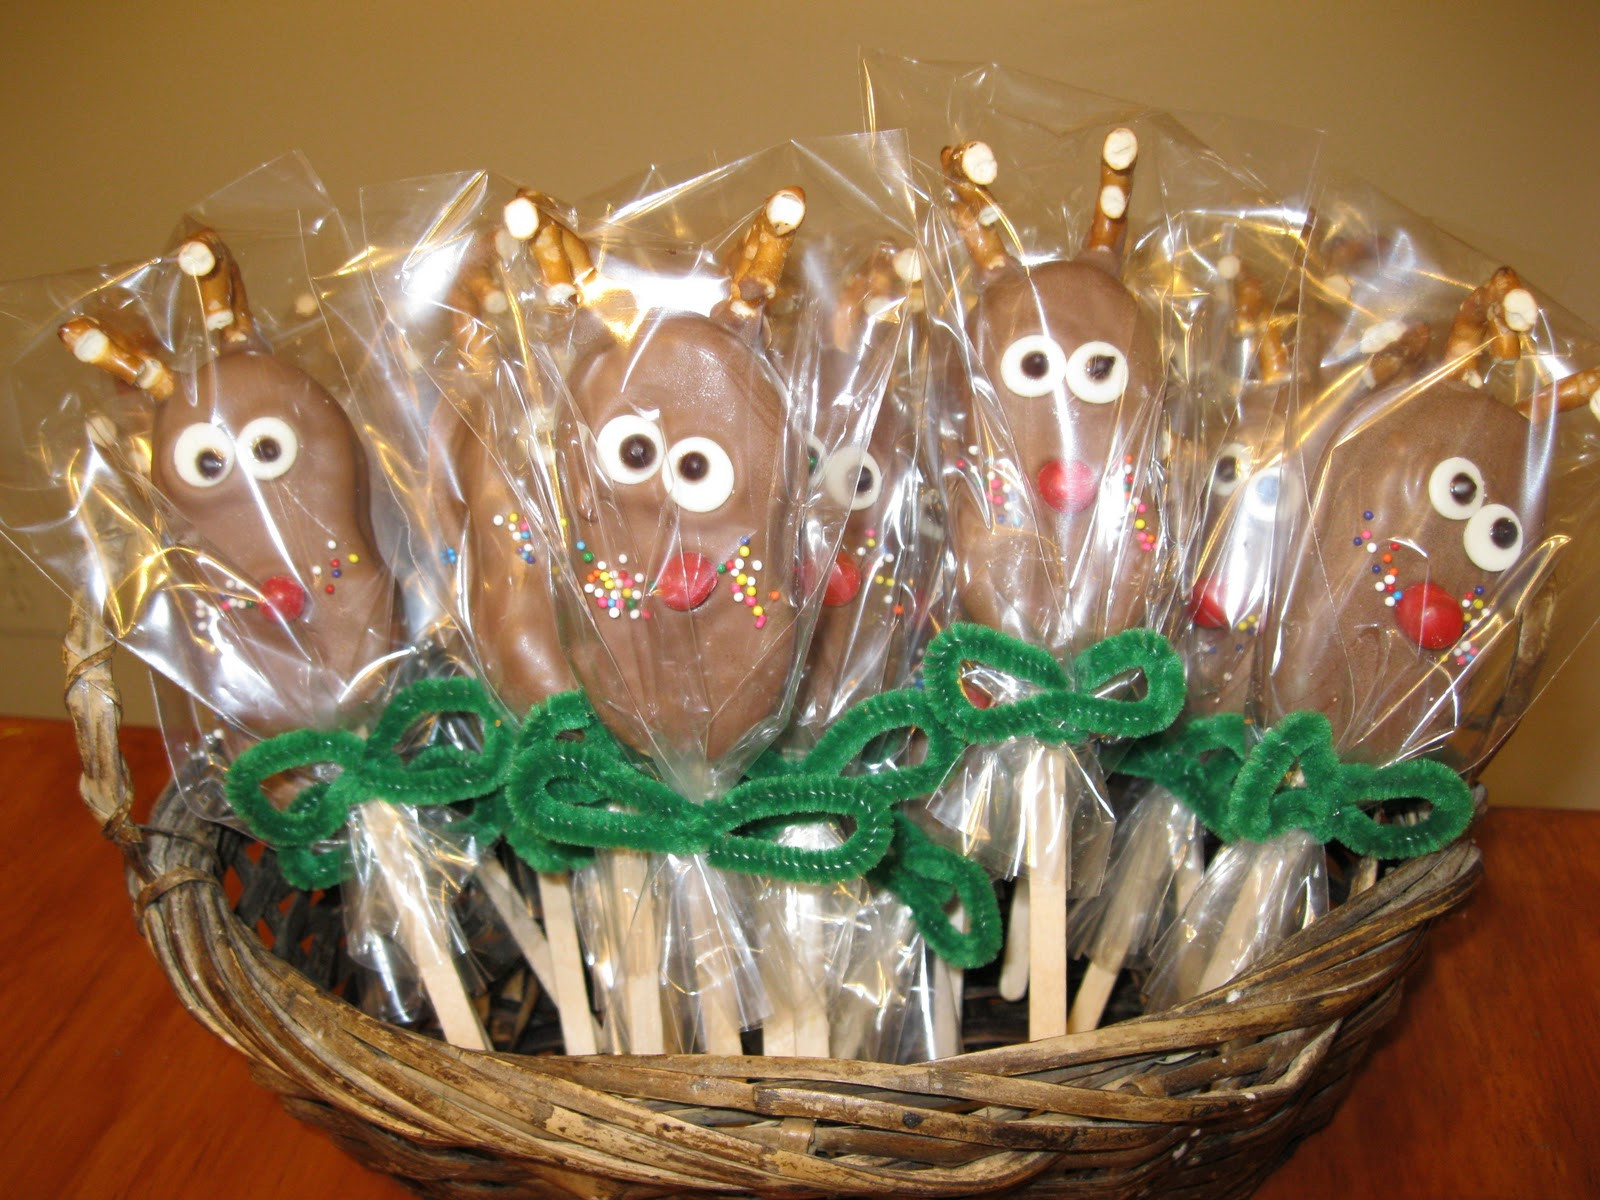 Group Gift Ideas For Christmas
 Maple and Vine Cute Christmas Gift Ideas for Groups